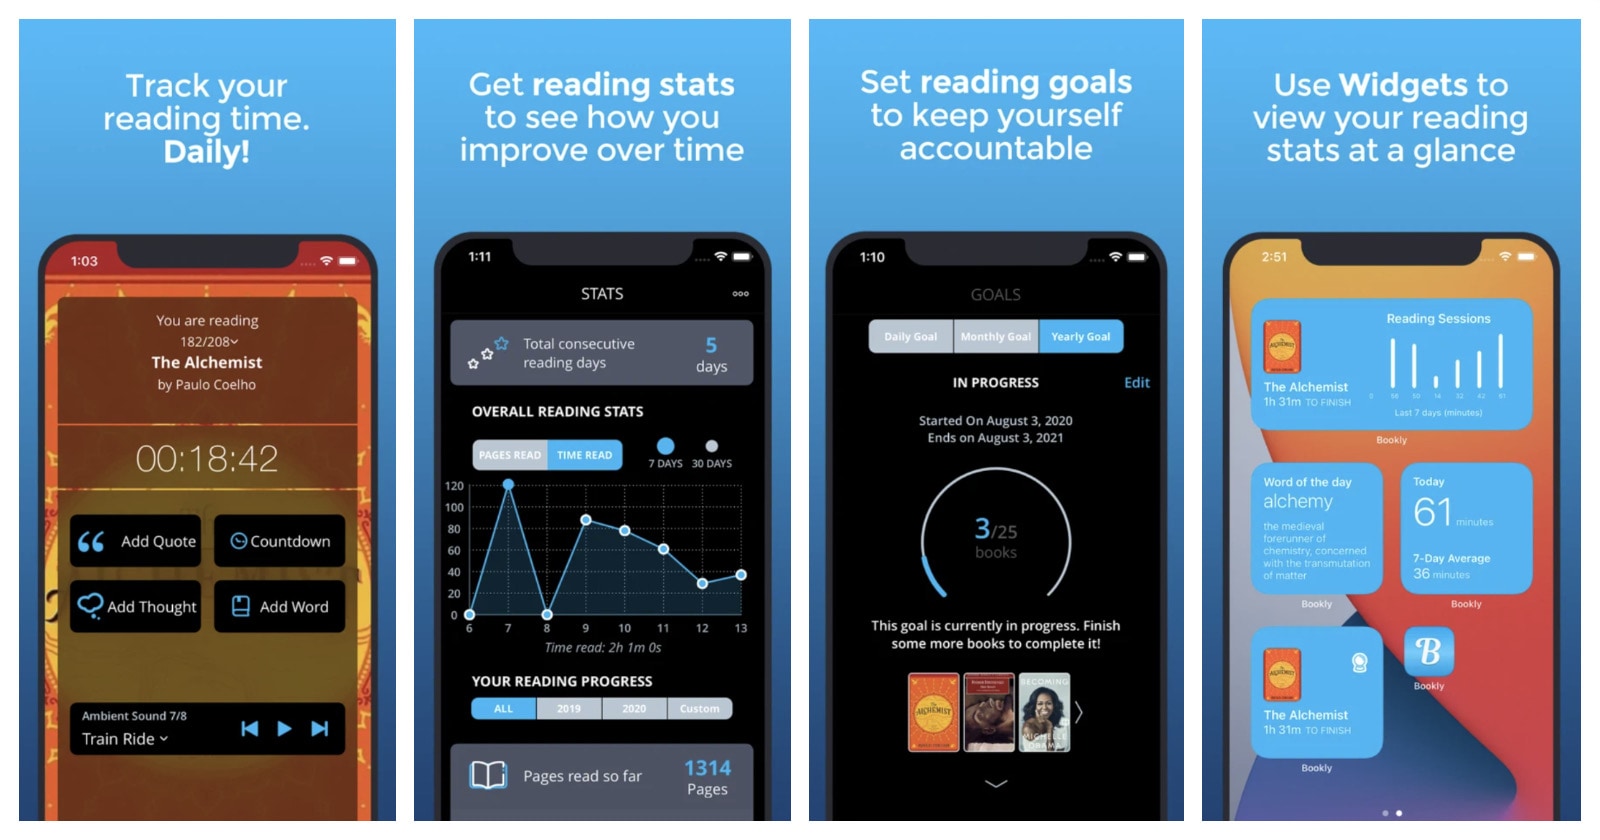 Enjoy more books with this great book-reading assistant